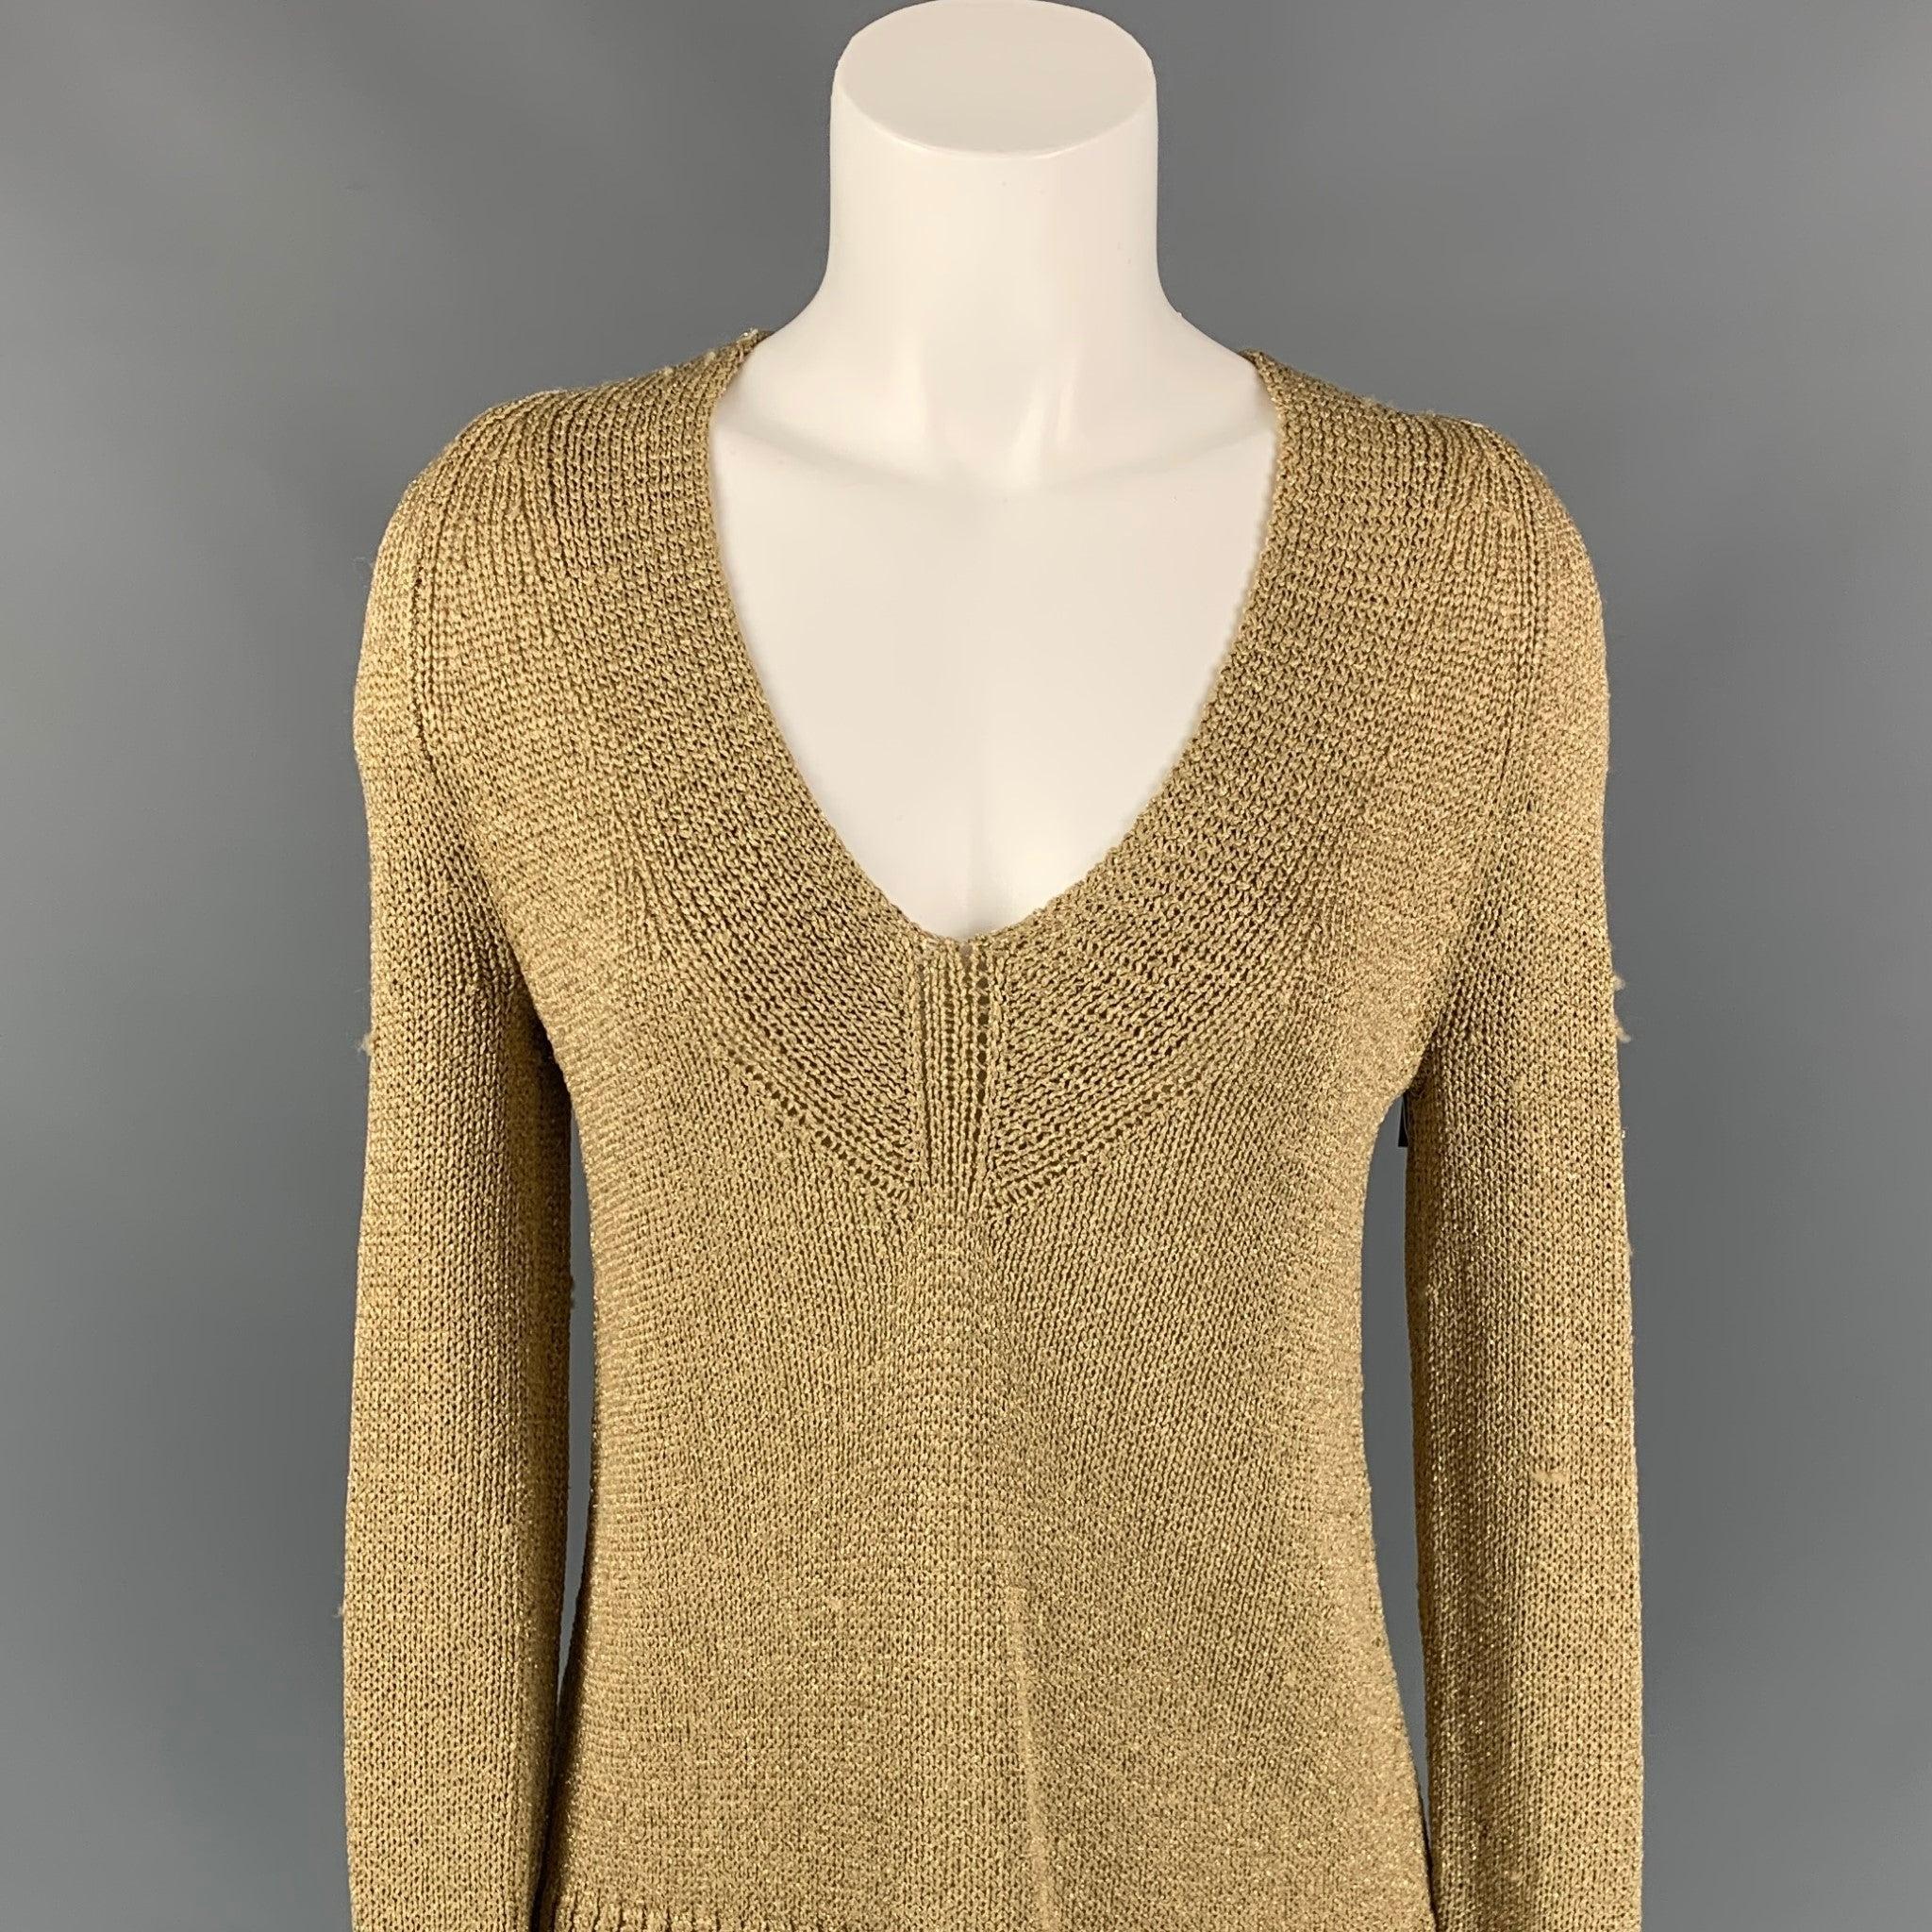 DIANE VON FURSTENBERG pullover comes in a gold knitted acetate blend featuring long sleeves and a deep v-neck.
New With Tags.
 

Marked:   P 

Measurements: 
 
Shoulder: 17 inches  Bust: 34 inches  Sleeve: 25.5 inches  Length: 27 inches 
  
  
